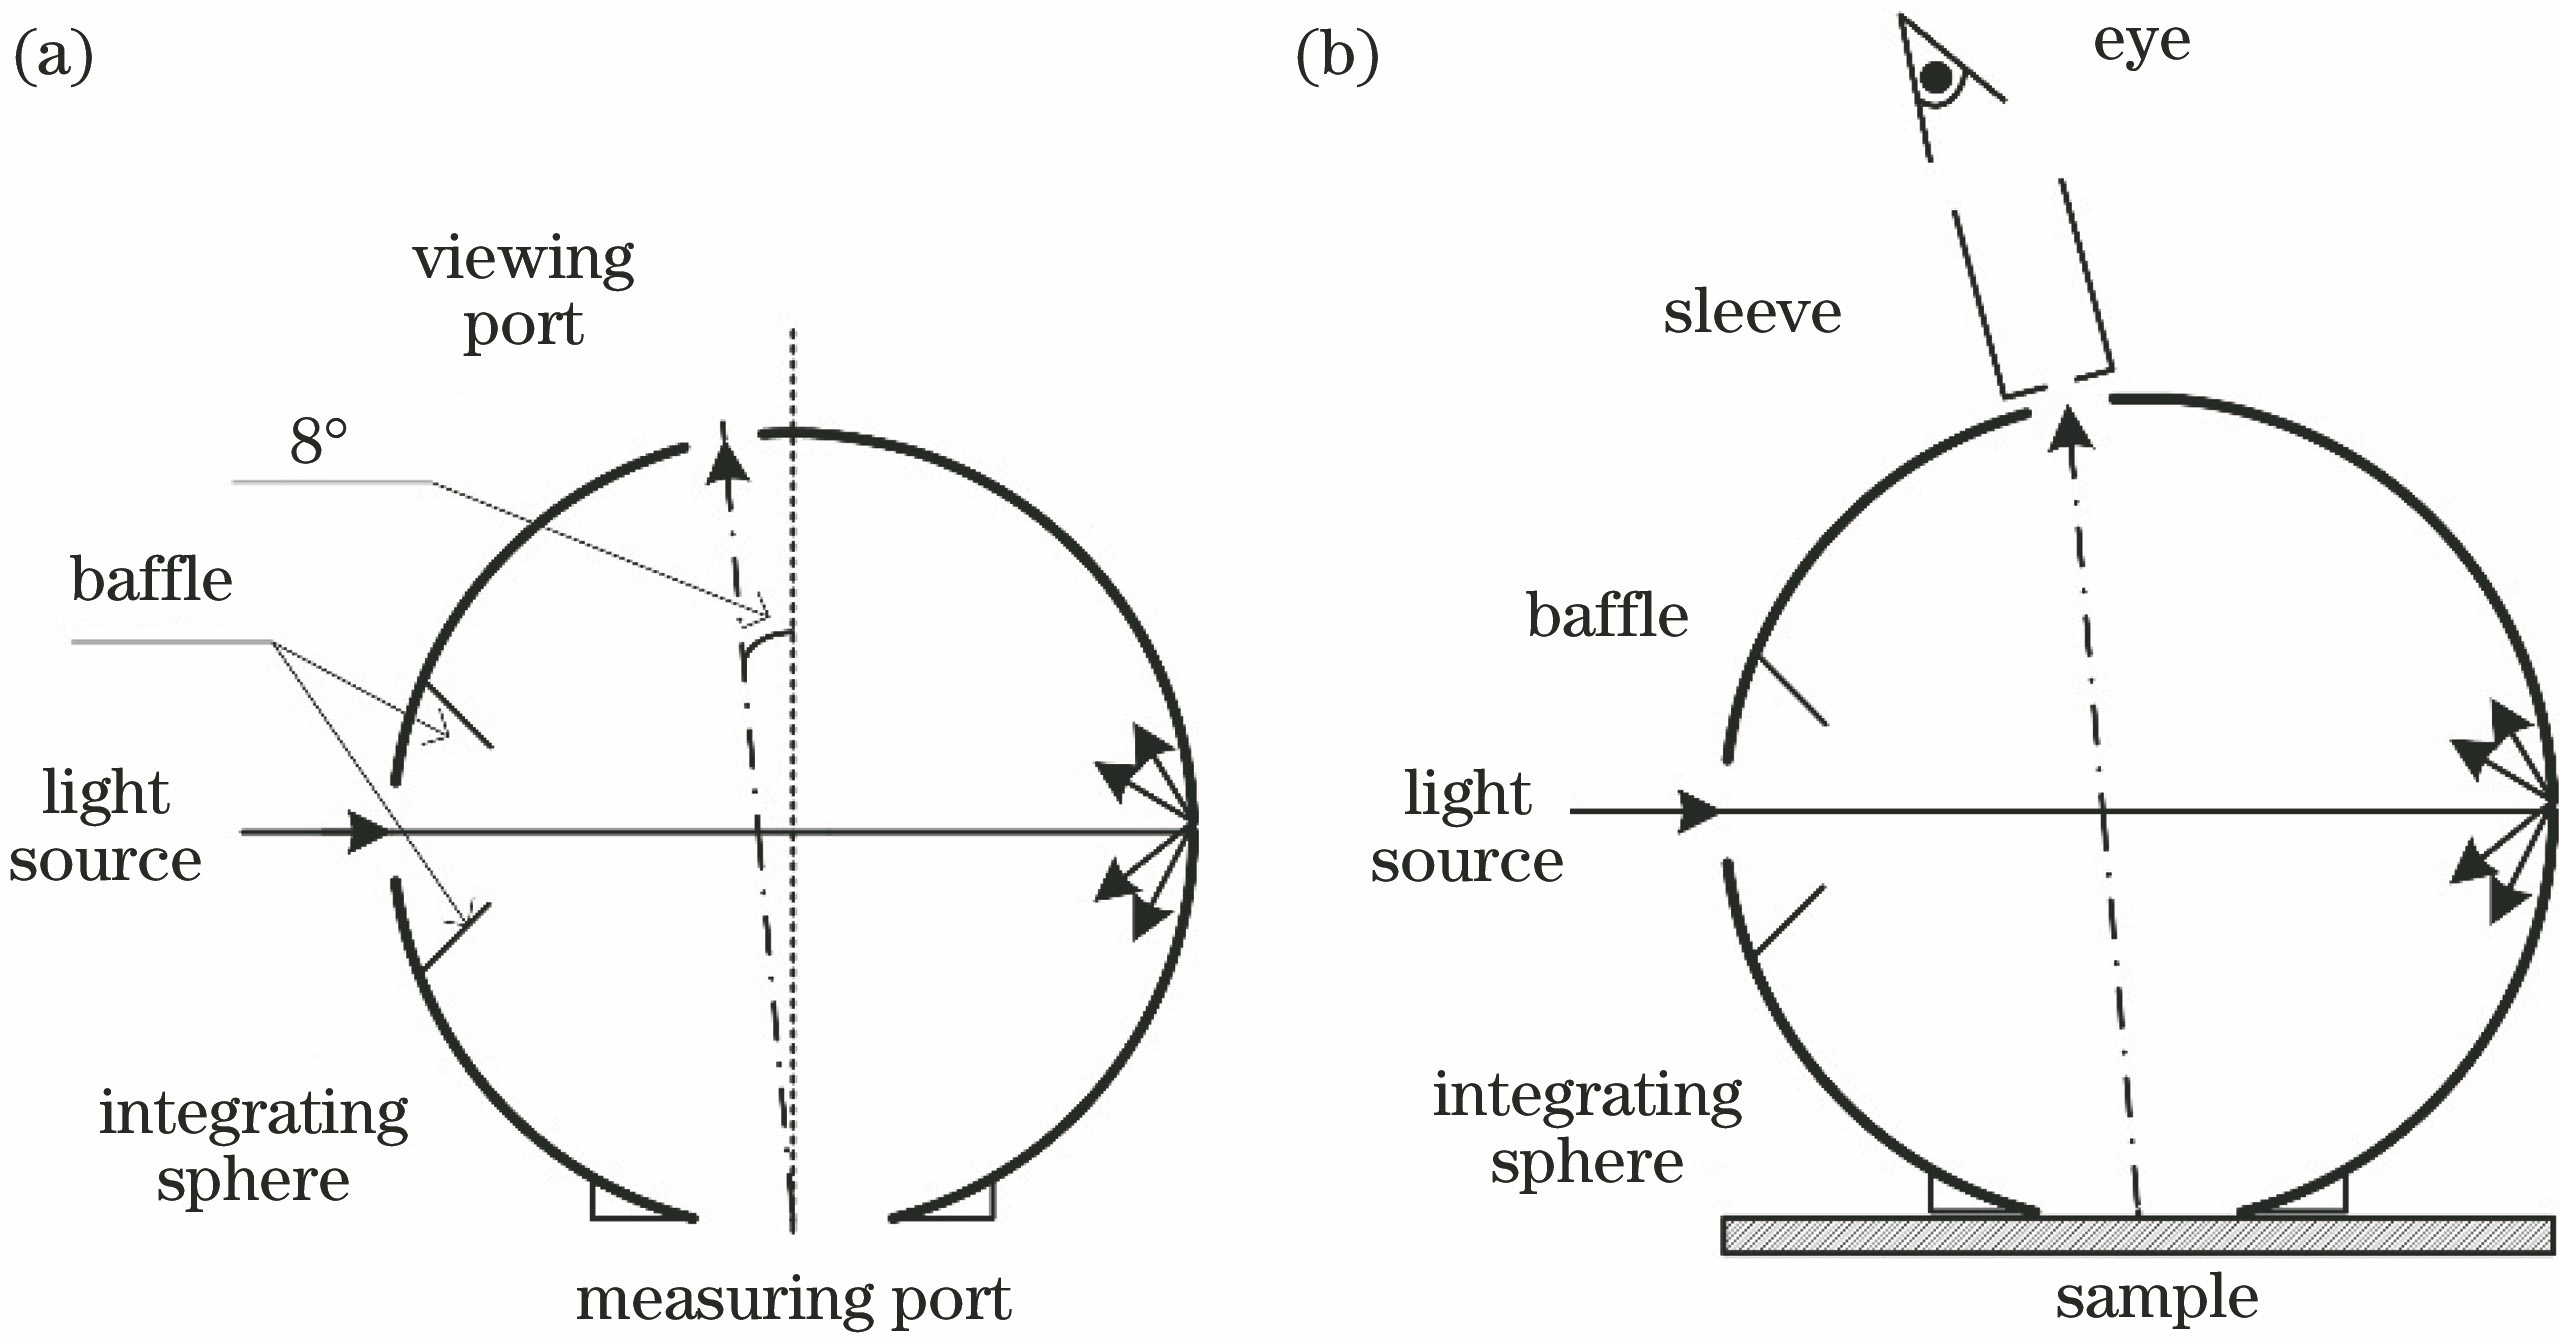 Structure diagram. (a) Integrating sphere; (b) schematic diagram of visual experiment